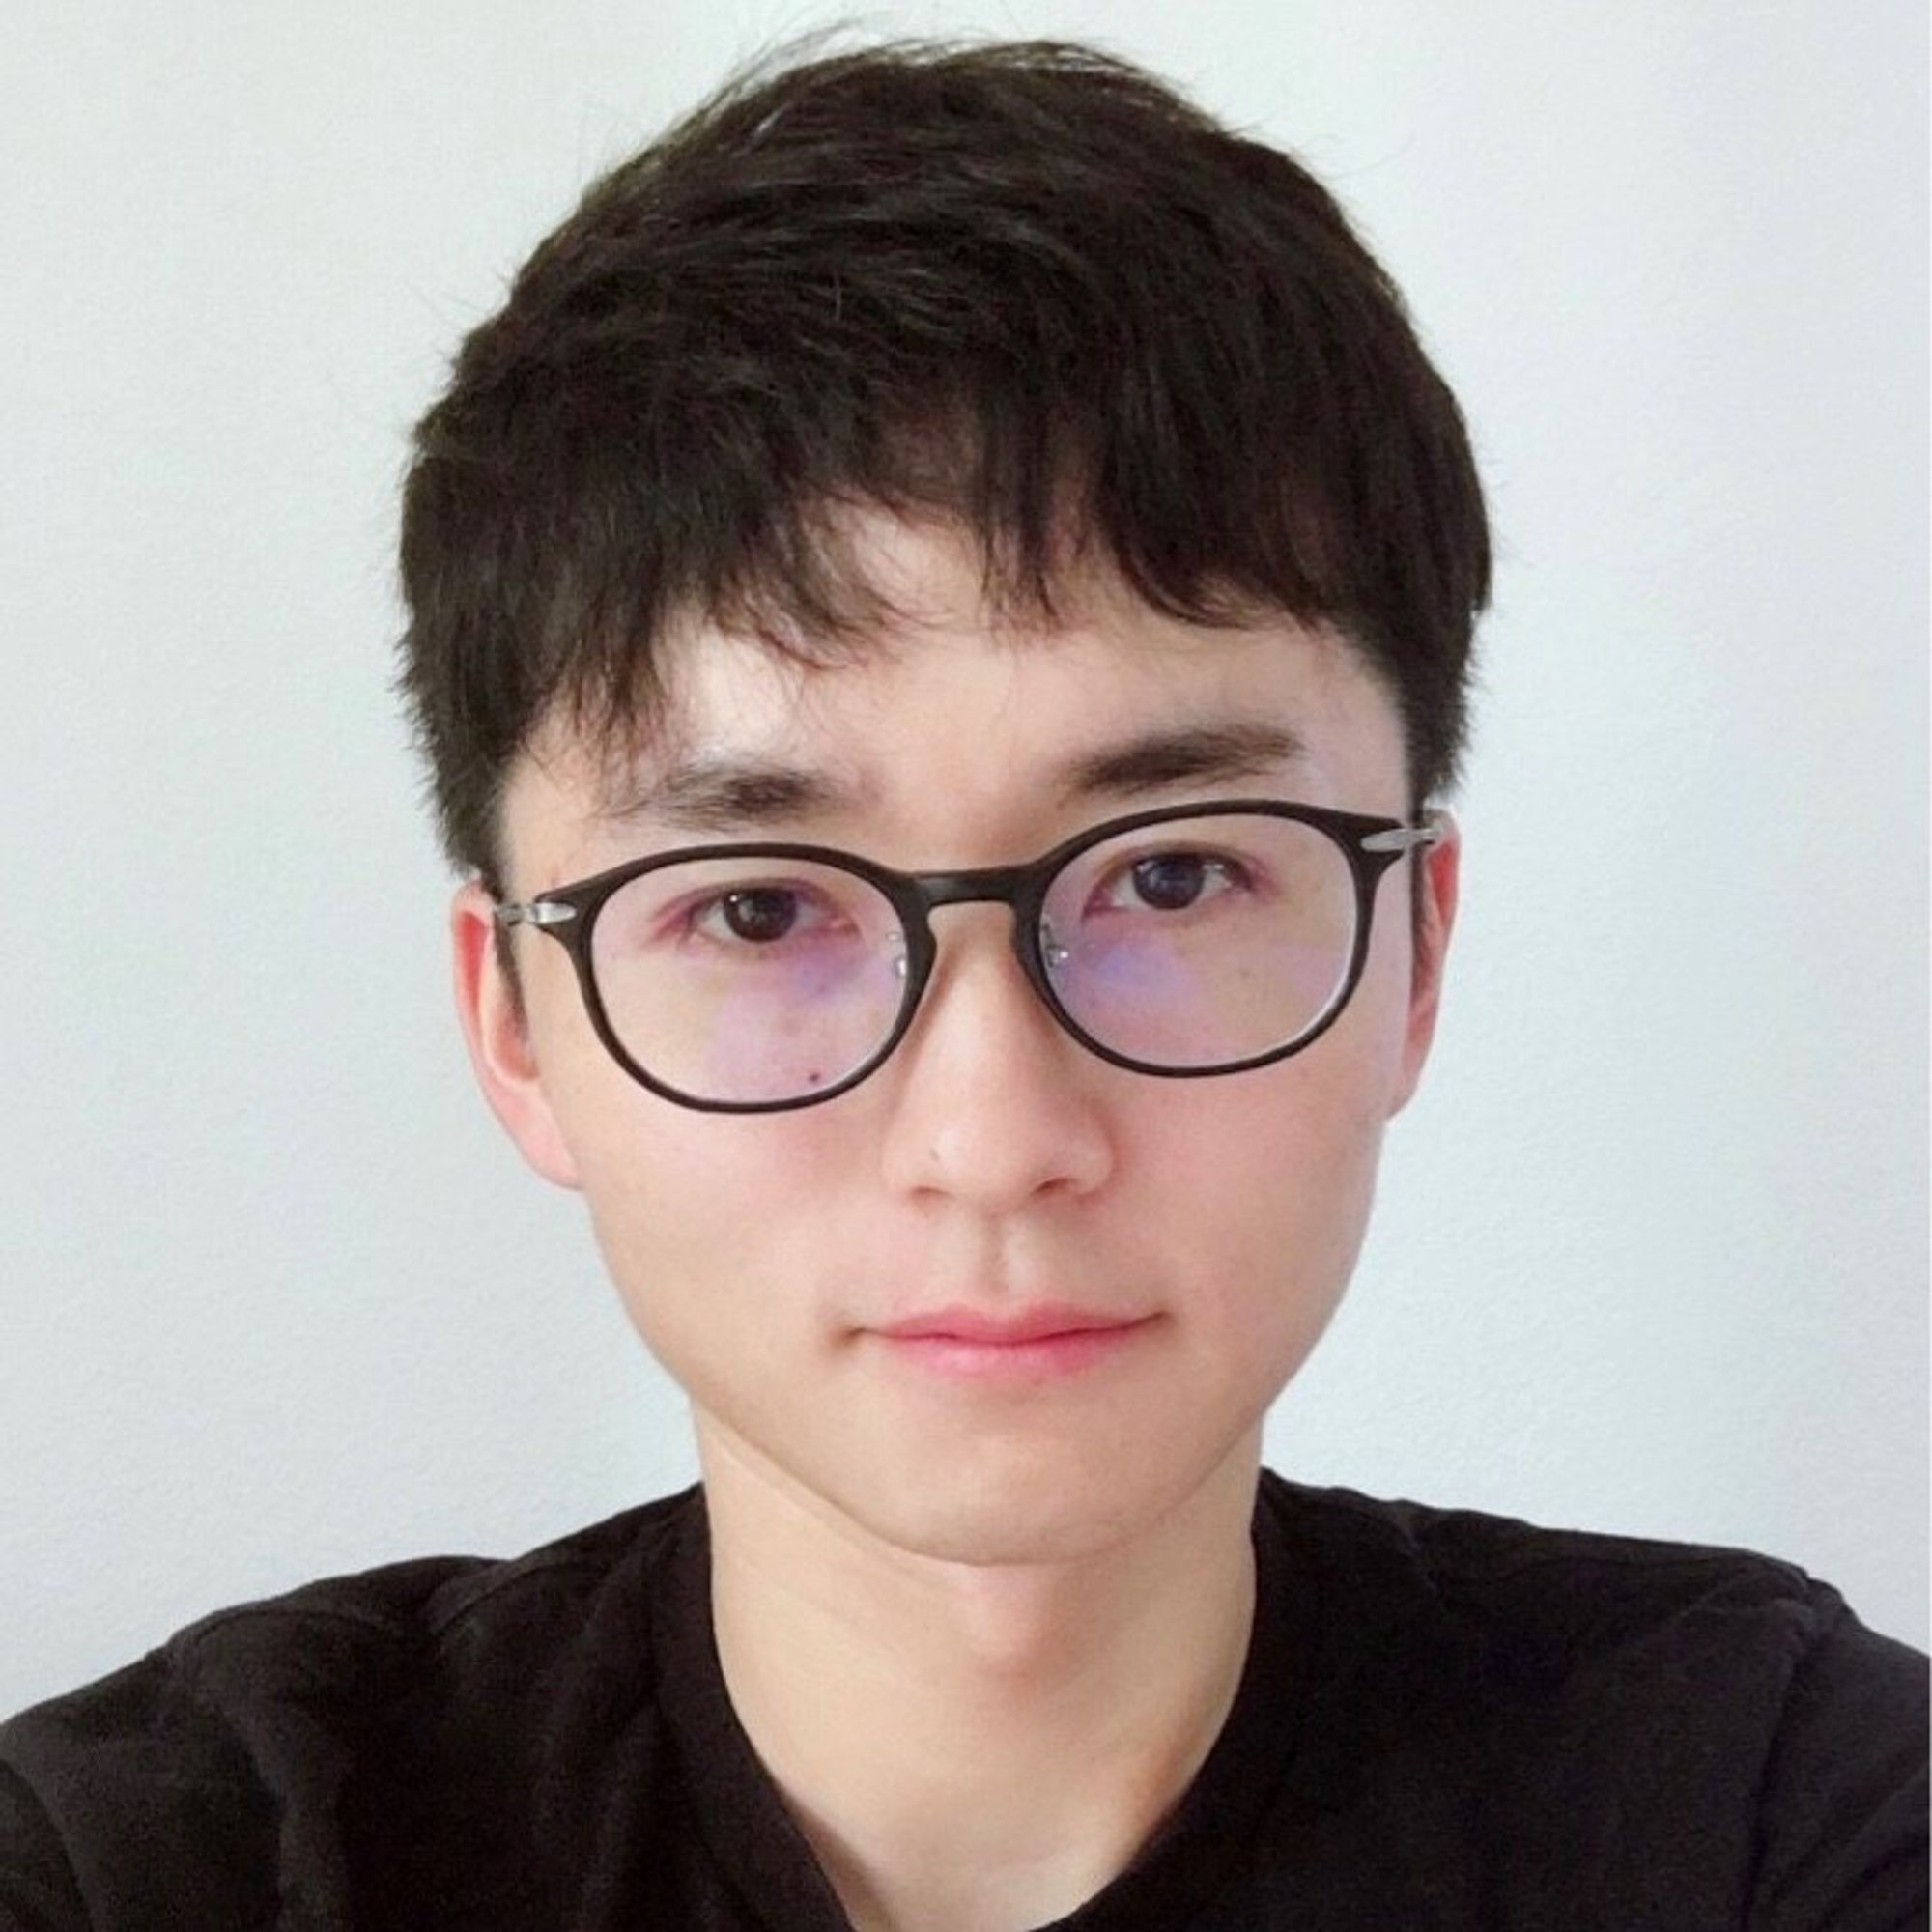 Jiajun Liu
Software Engineer
Prior Senior Software Engineer @ Airbnb • Loves playing video games, competitive E-sports and golf maniac